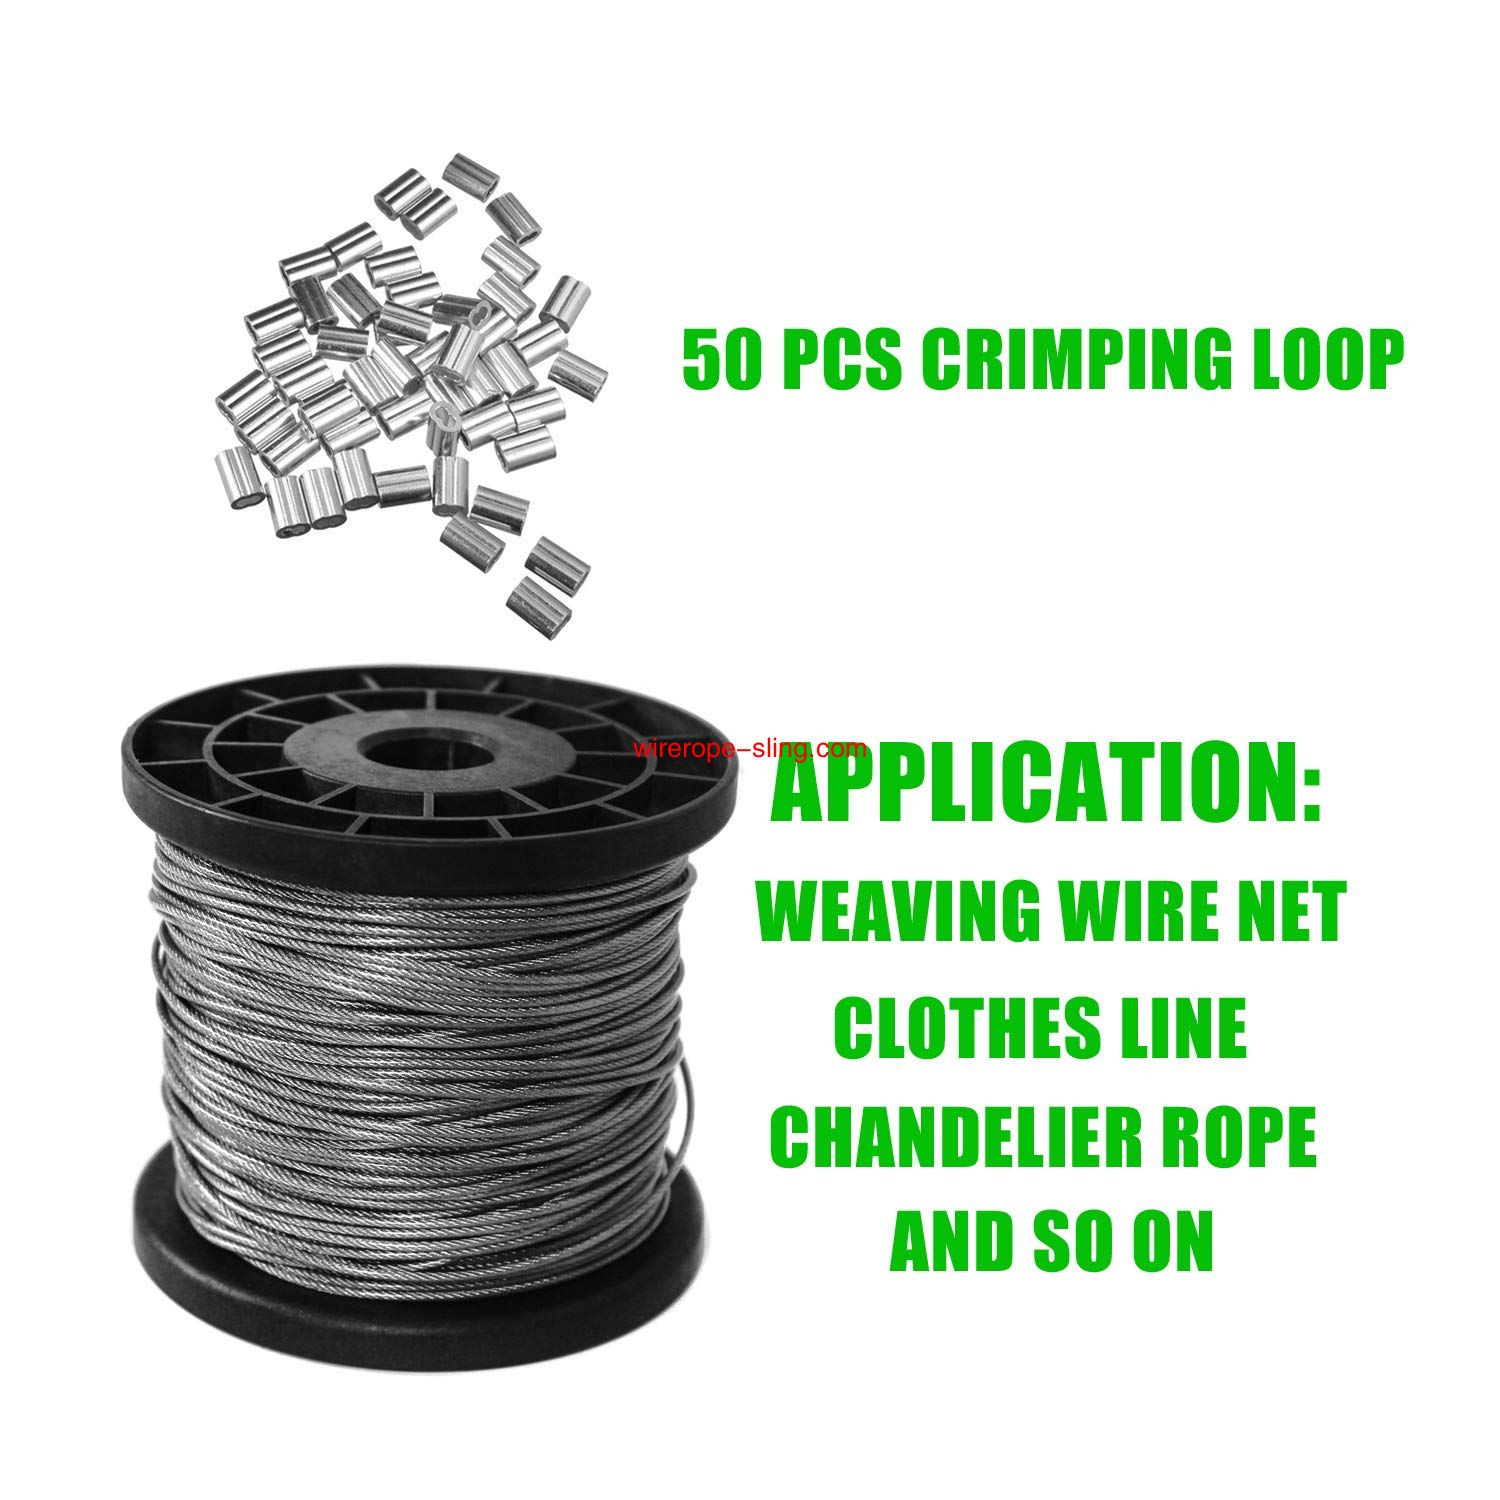 1/16 Vinyl Coated Wire Rope Kit,330 Feet Stainless Steel 304 Wire Rope con 50 PCS Aluminum Crimping Loop e 10 PCS Clamps